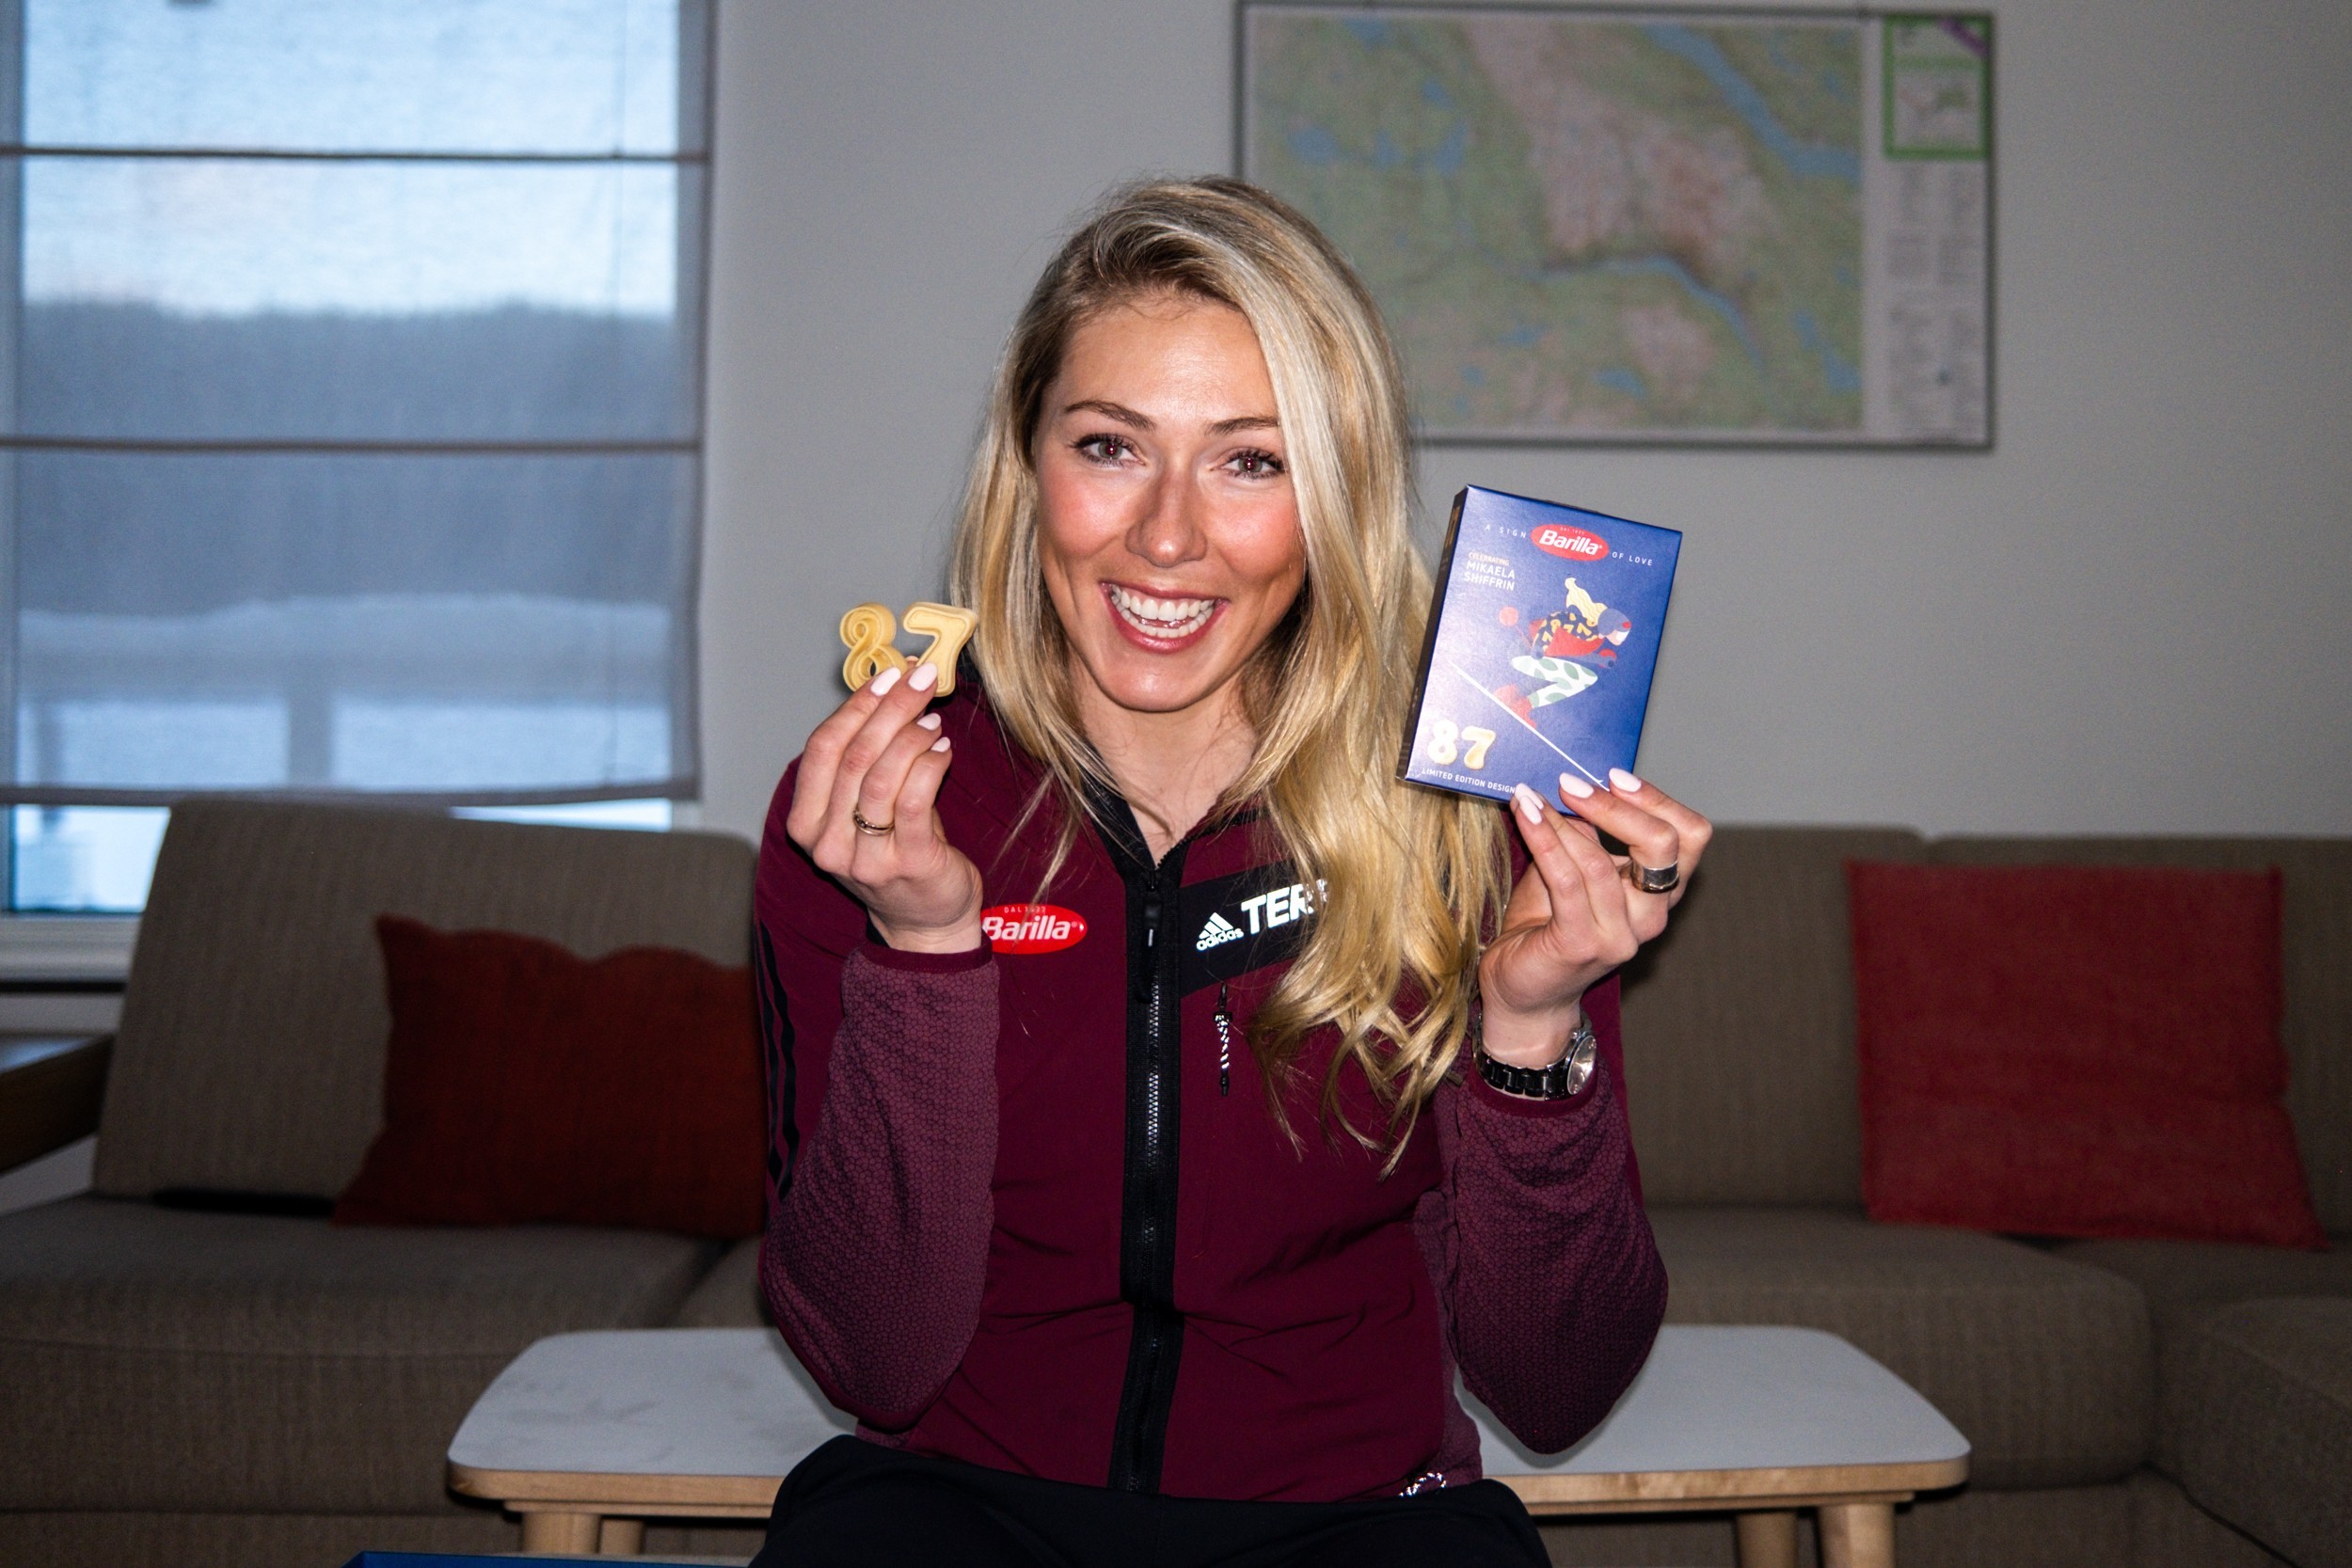 Barilla & Mikaela Shiffrin: Greatness starts with a great recipe - Pack No. 73